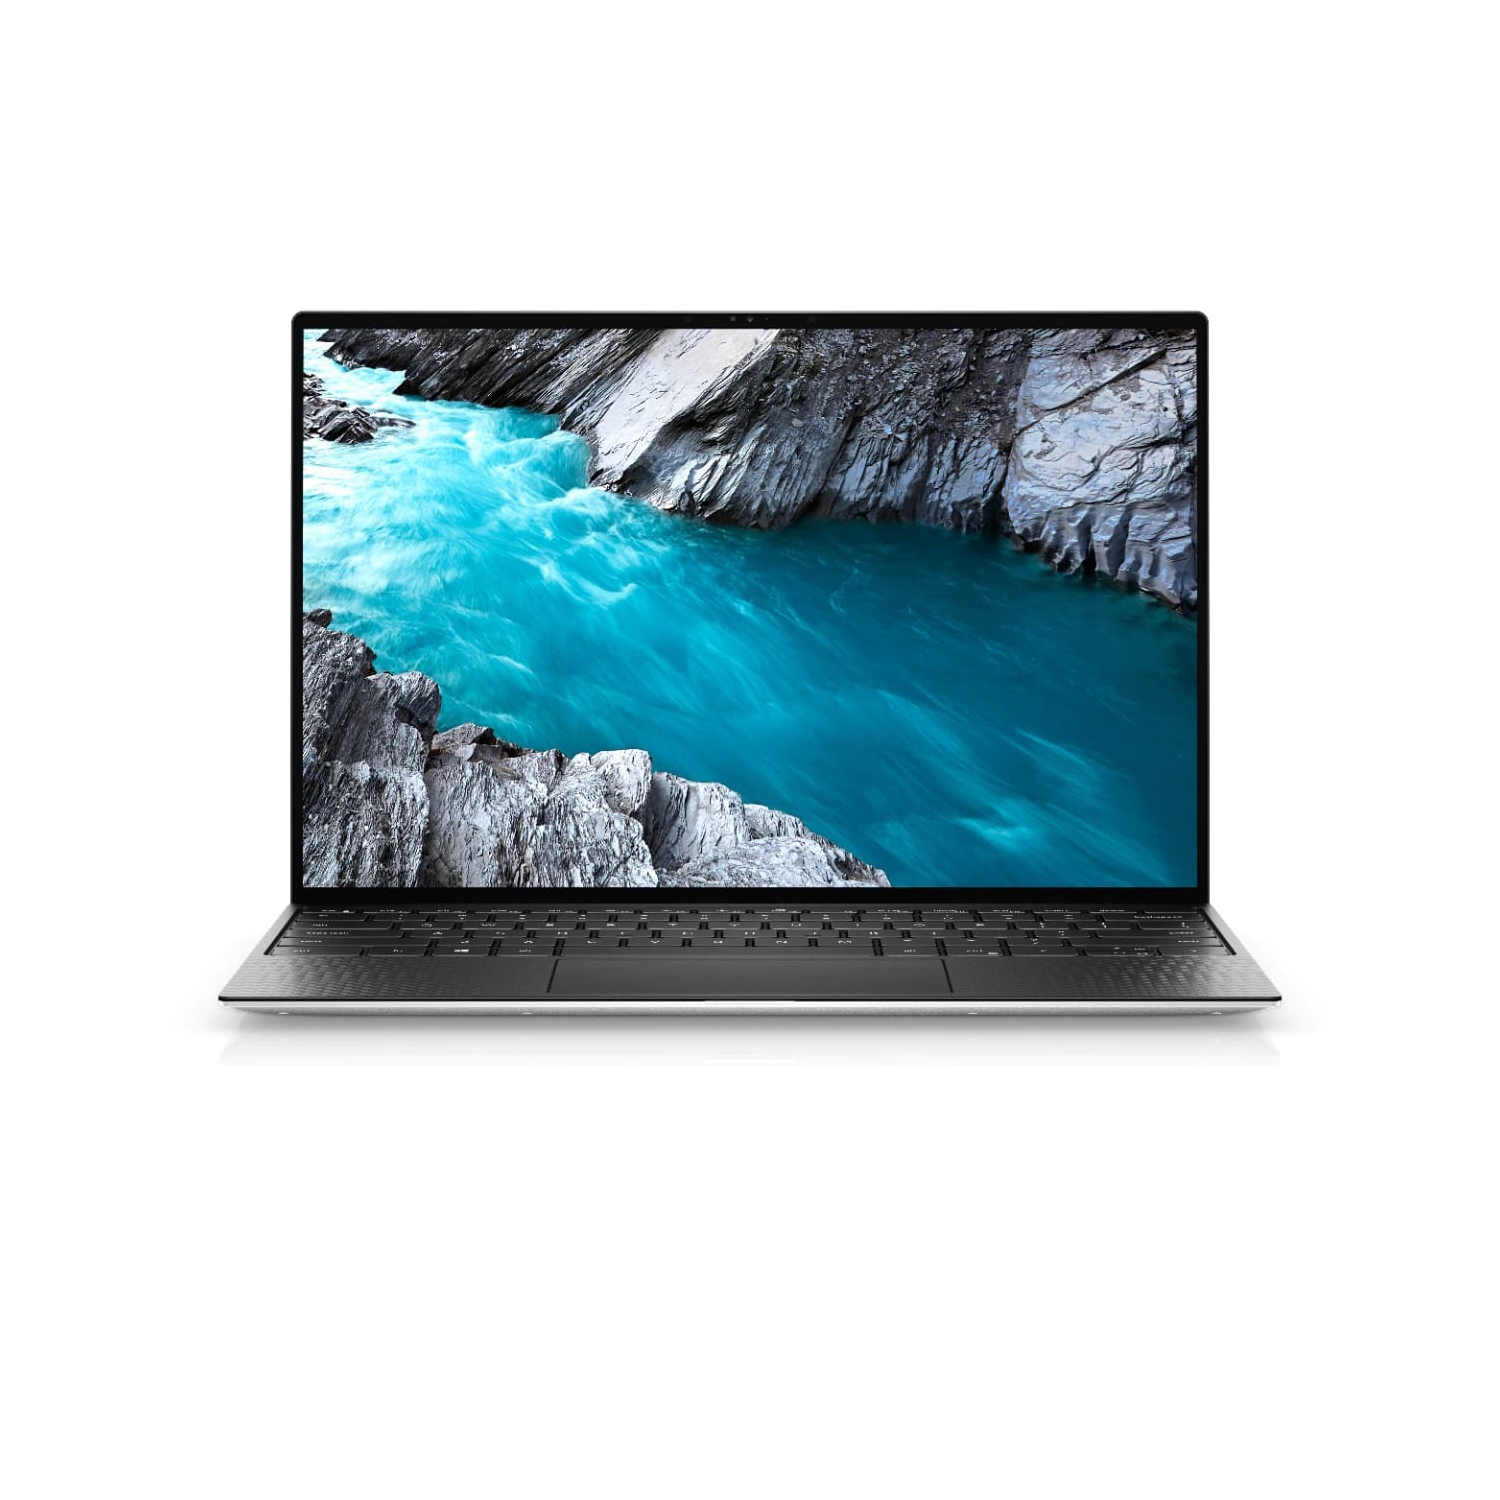 Refurbished (Excellent) - Dell XPS 13 9300 Laptop (2020) | 13.3" 4K Touch | Core i7 - 256GB SSD - 8GB RAM | 4 Cores @ 3.9 GHz - 10th Gen CPU Certified Refurbished